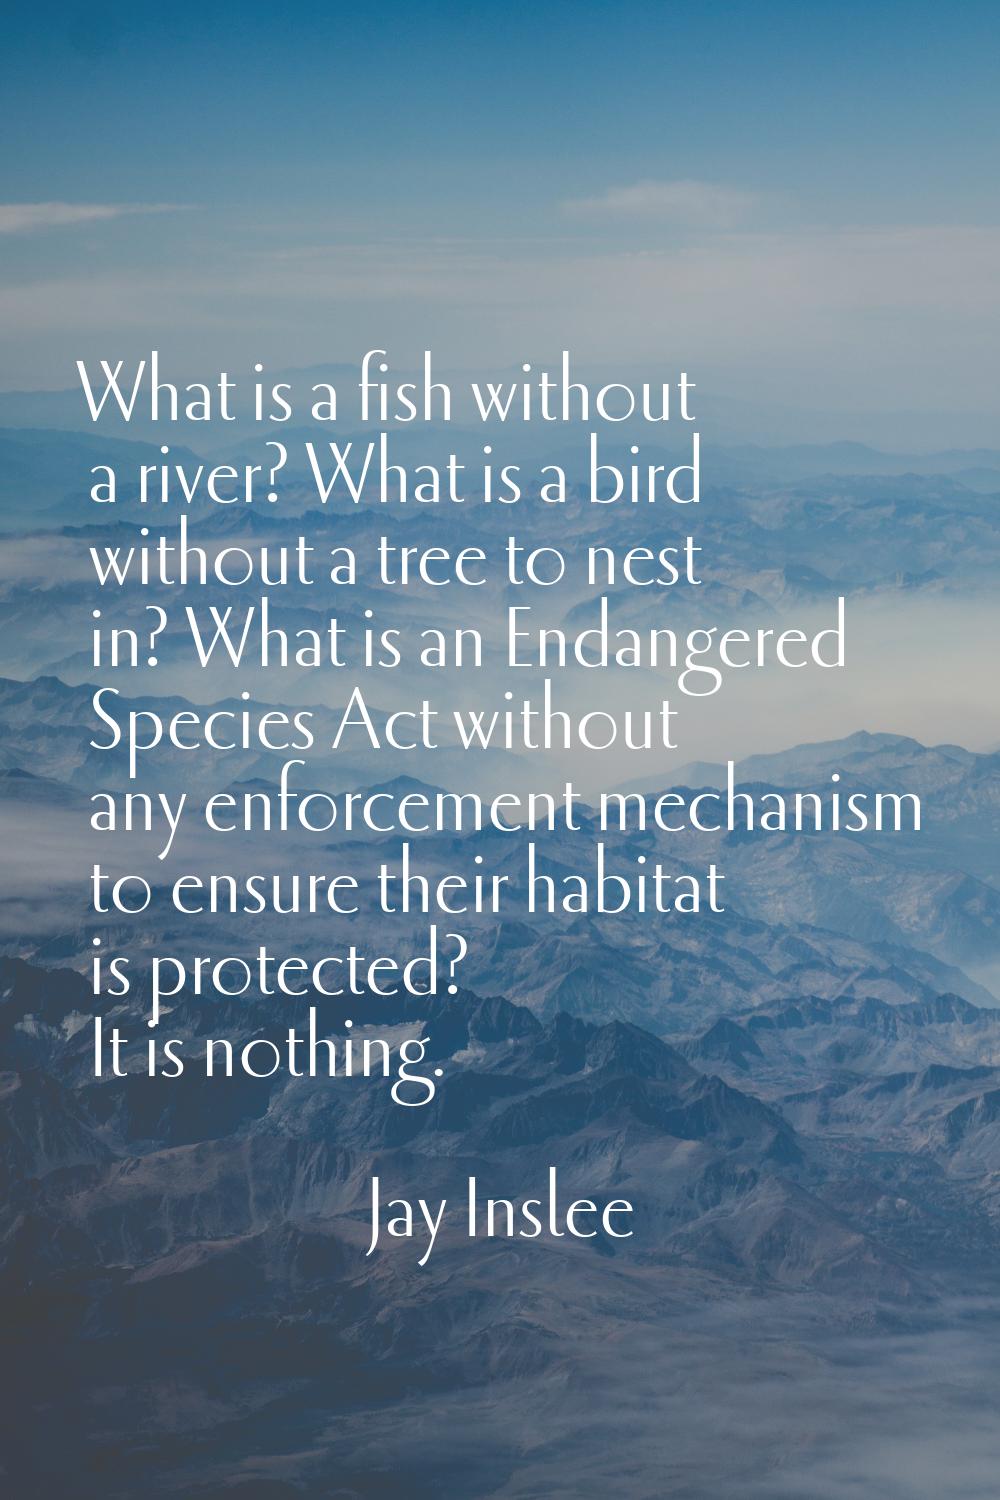 What is a fish without a river? What is a bird without a tree to nest in? What is an Endangered Spe